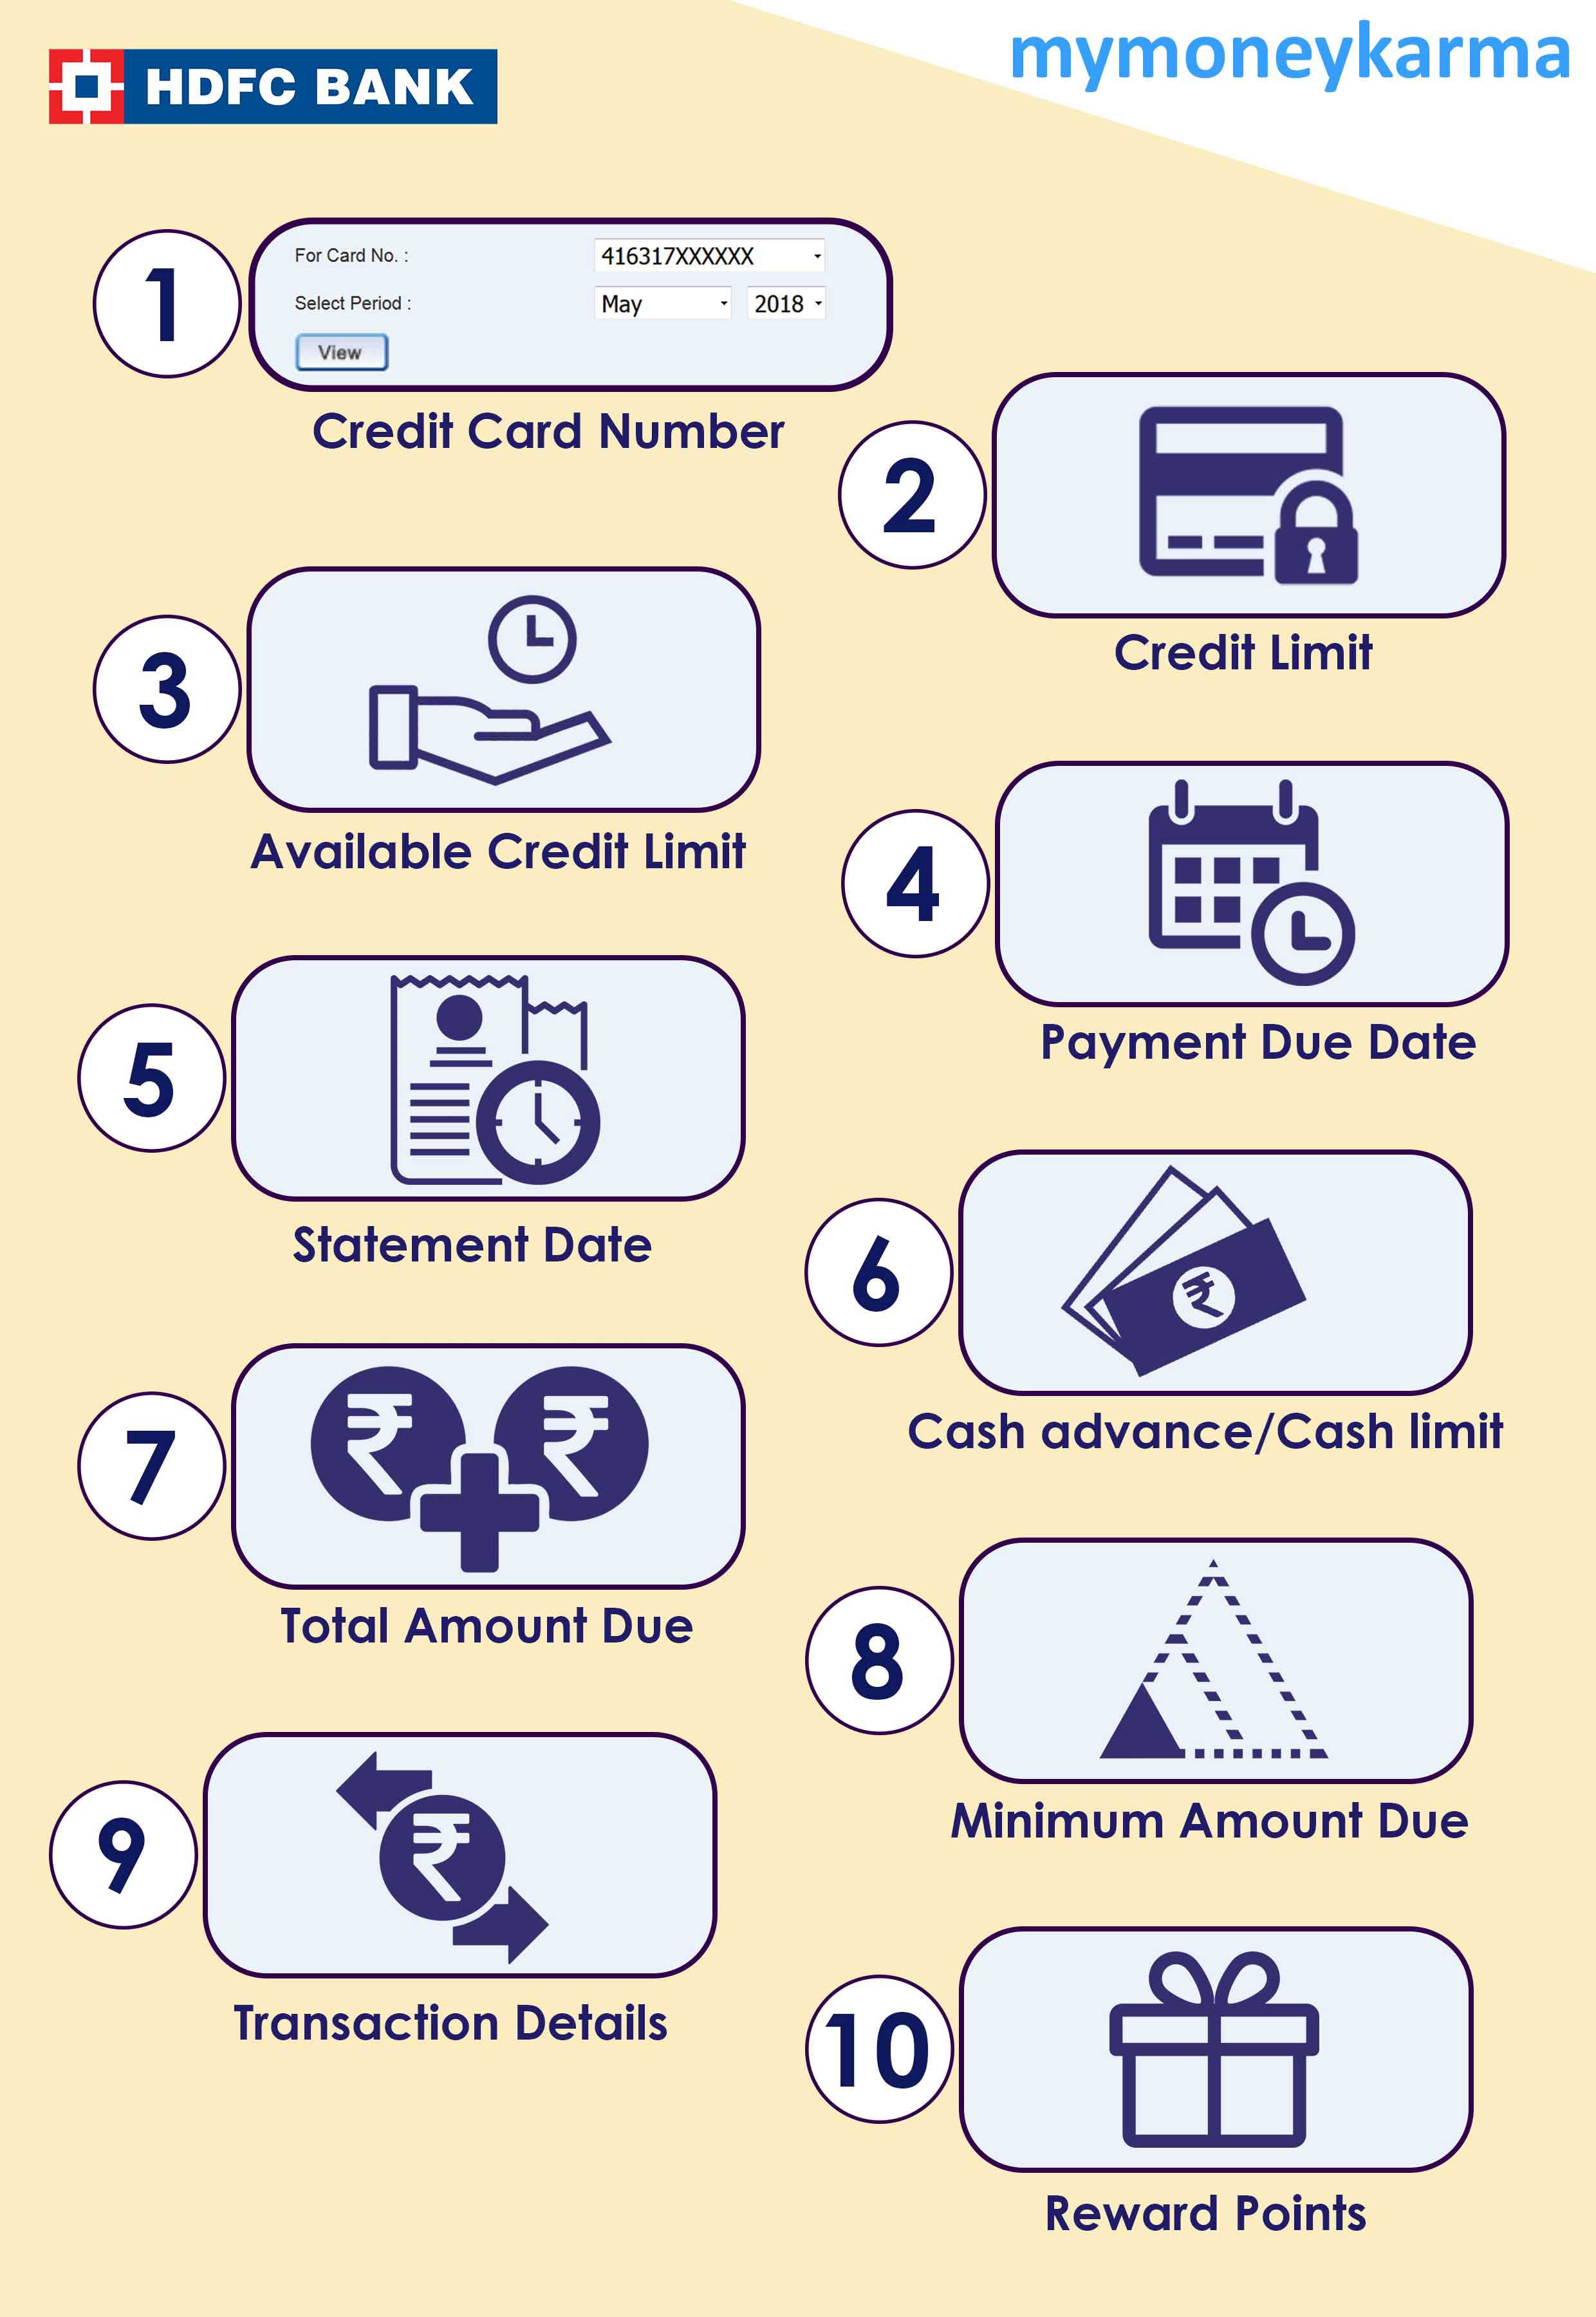 Learn about what is contained in HDFC Credit Card Statement. Credit card number, credit limit, available credit limit, payment due date, statement date, cash limit, total amount due, minimum amount due, transaction detail, hdfc credit card reward points